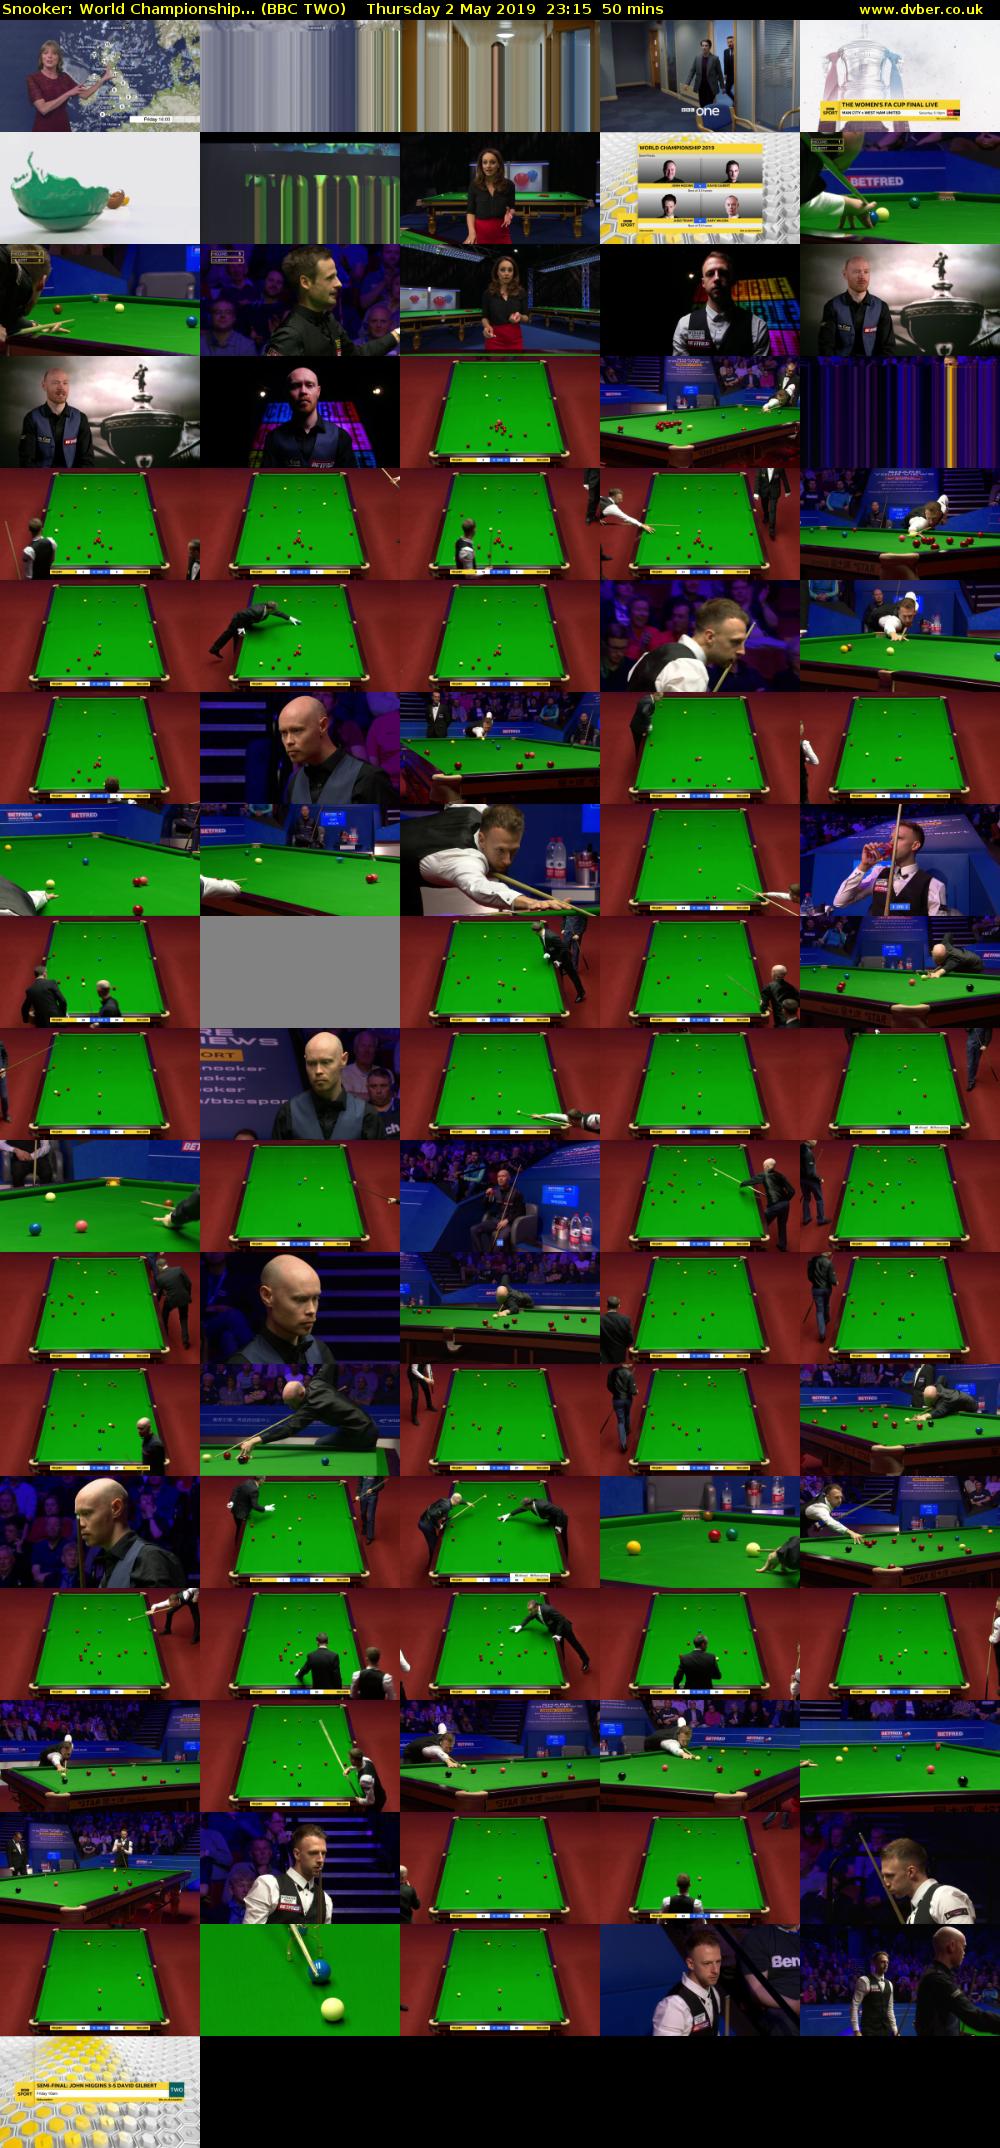 Snooker: World Championship... (BBC TWO) Thursday 2 May 2019 23:15 - 00:05